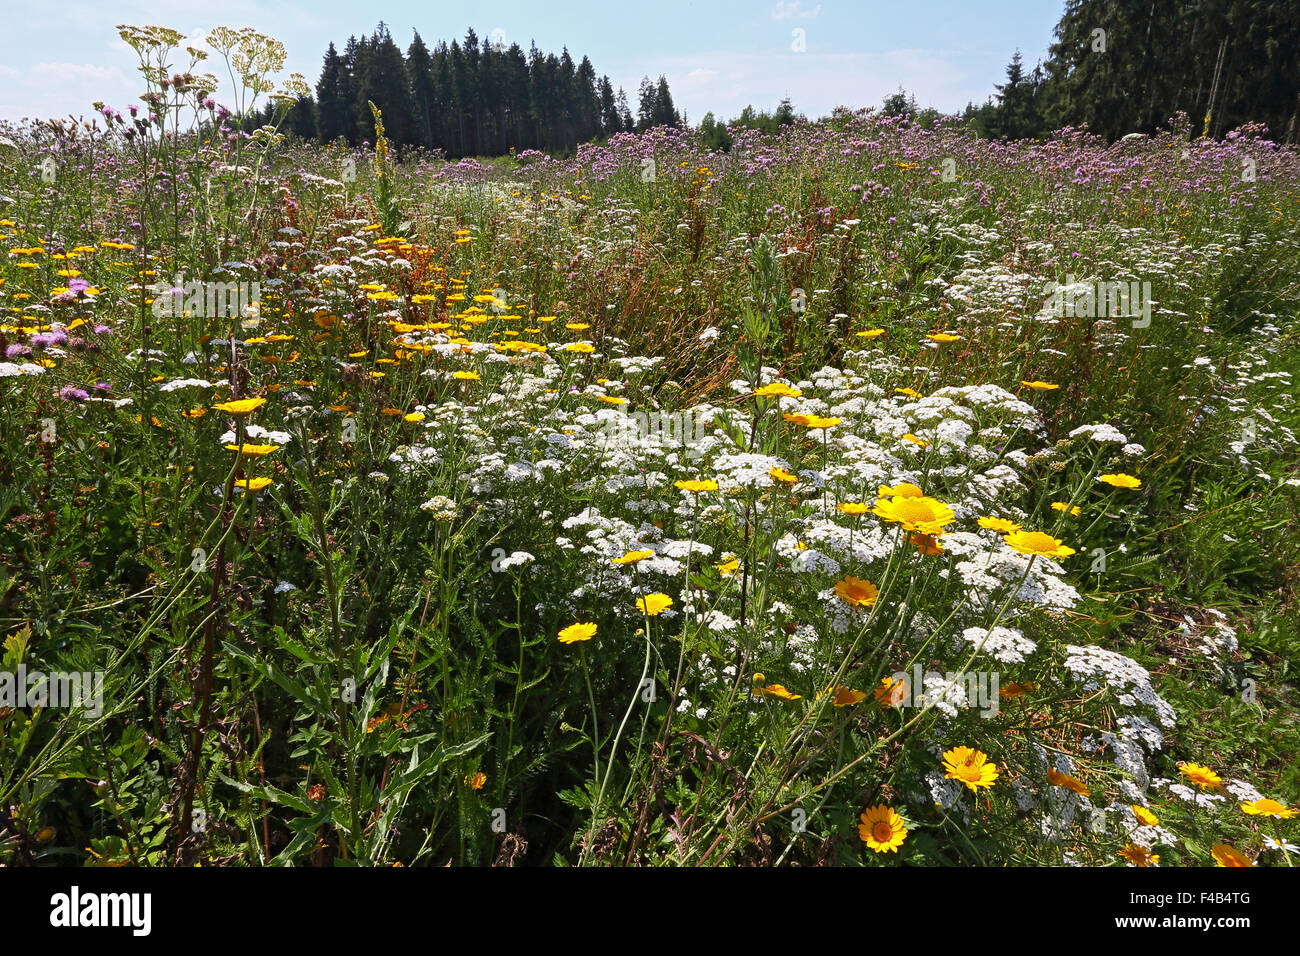 Summer meadow, dry ruderal vegetation Stock Photo